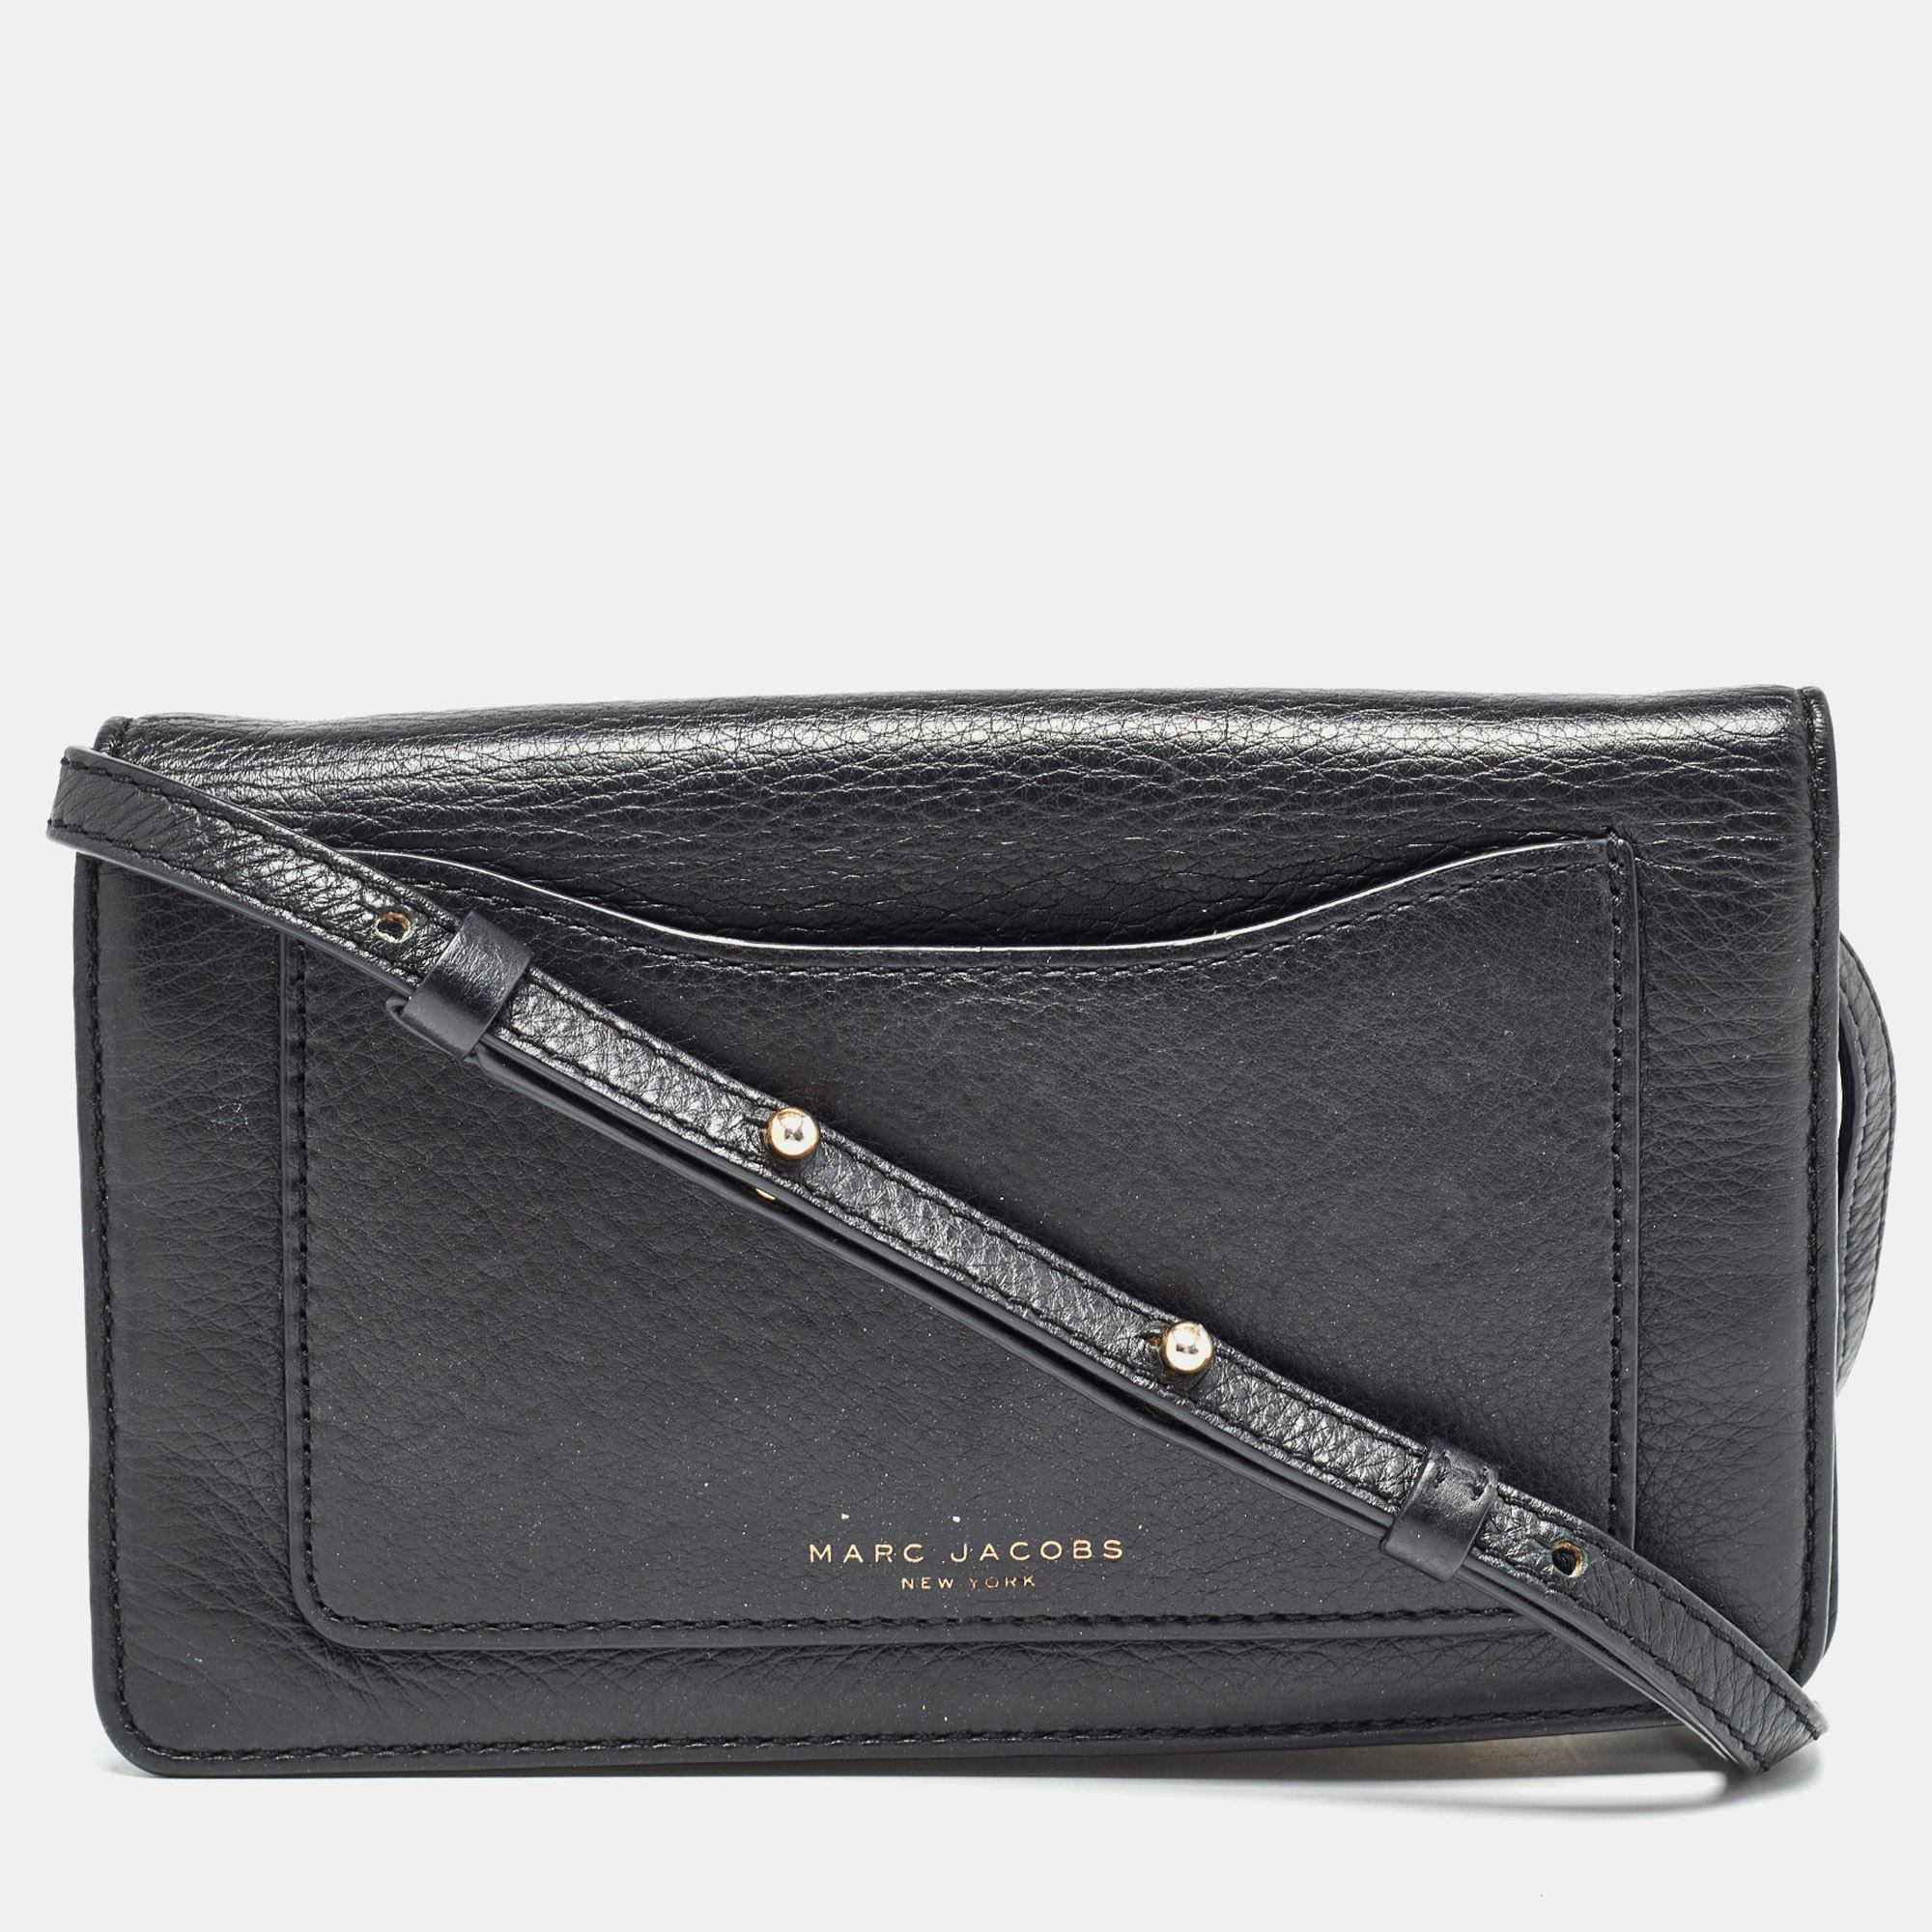 

Marc Jacobs Black Leather Recruit Wallet on Strap